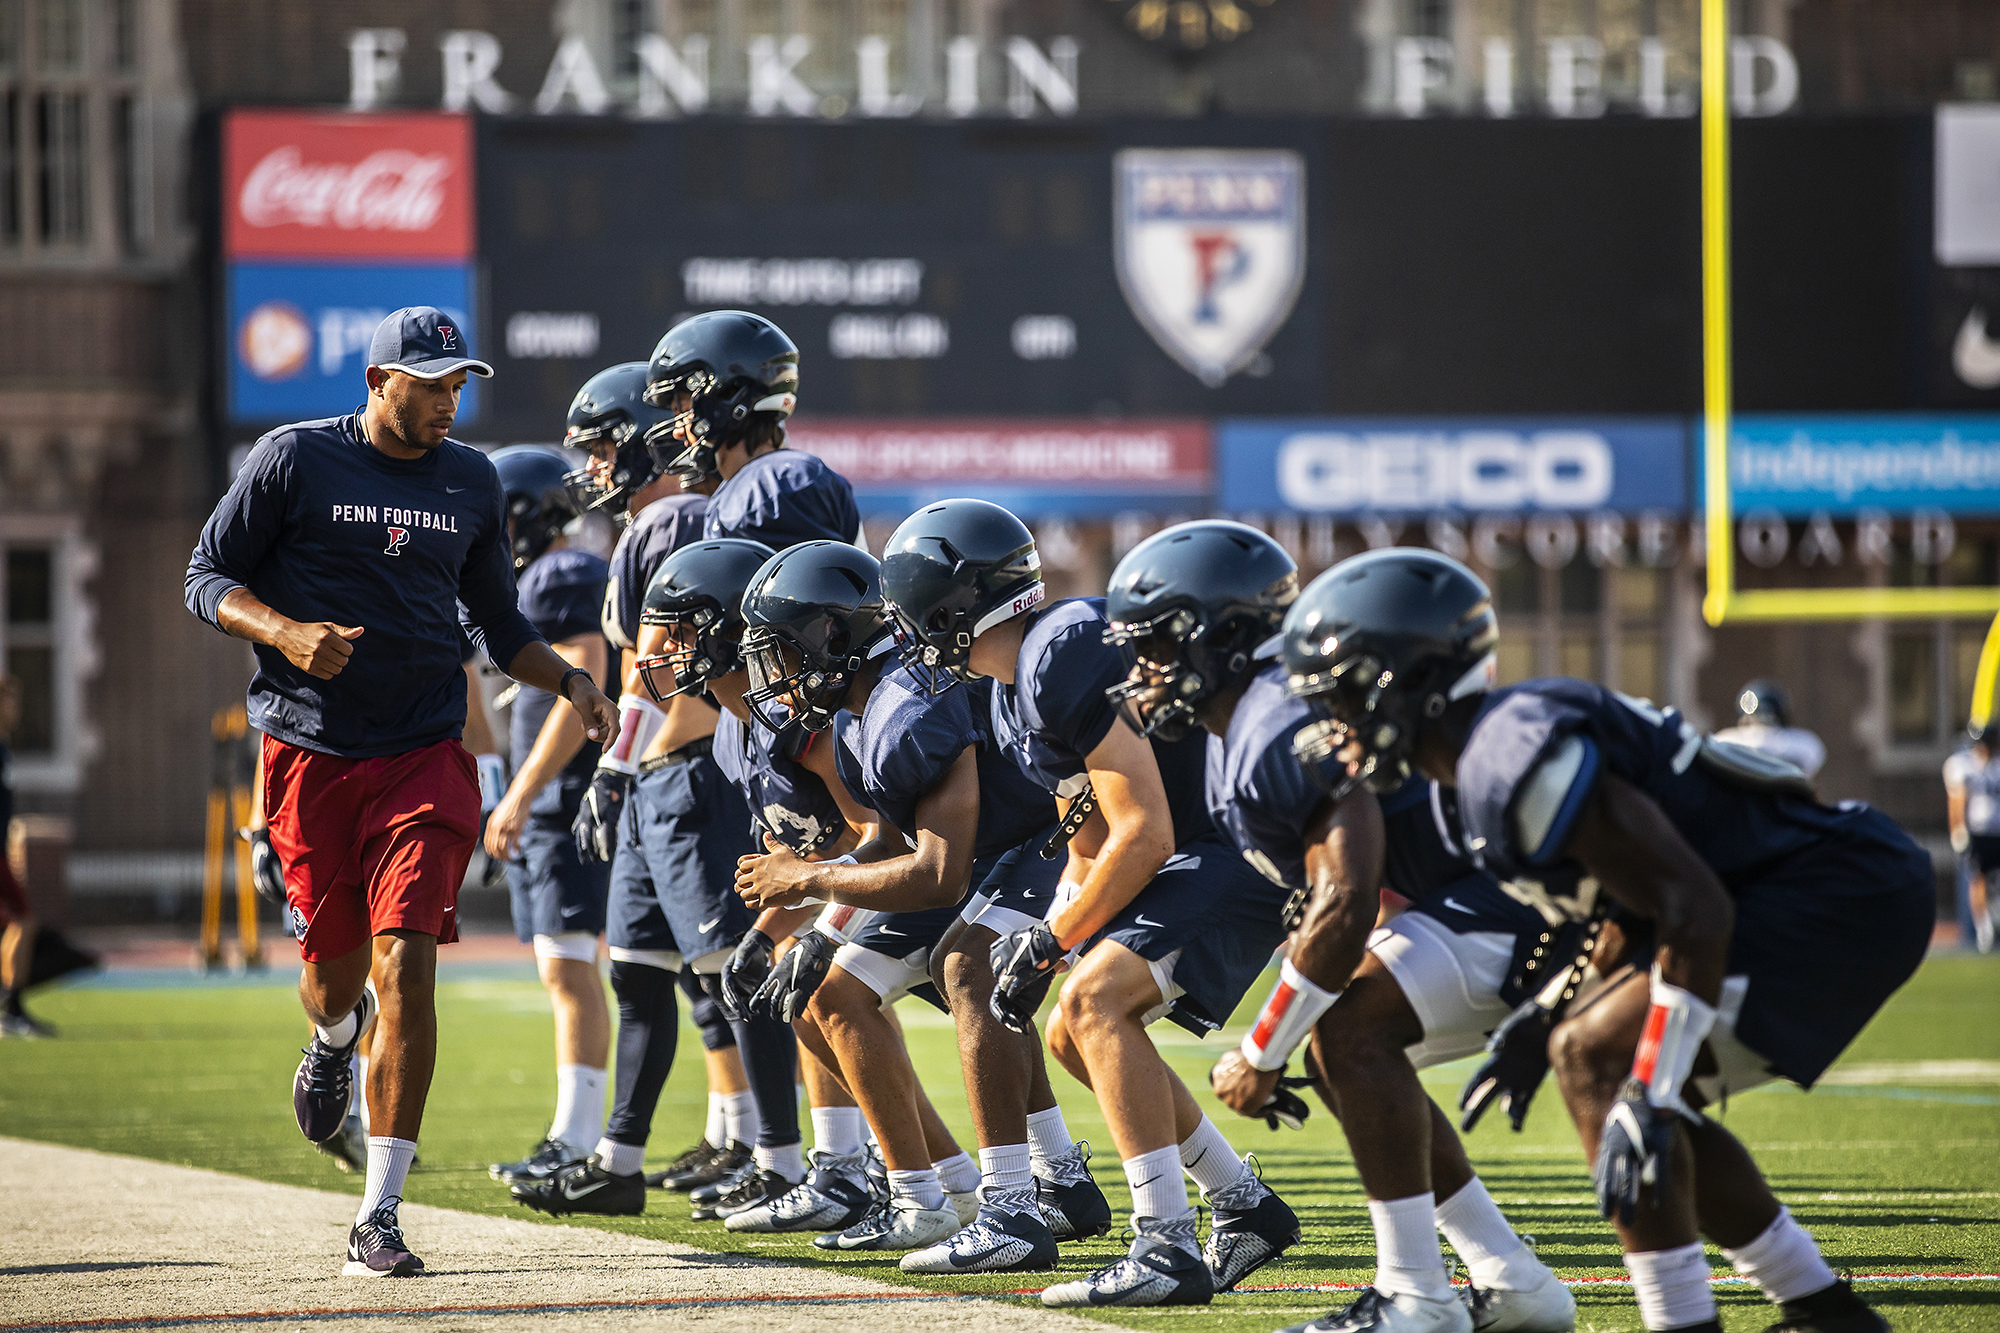 During preseason practice at Franklin Field, football players line up for a drill with their coach.